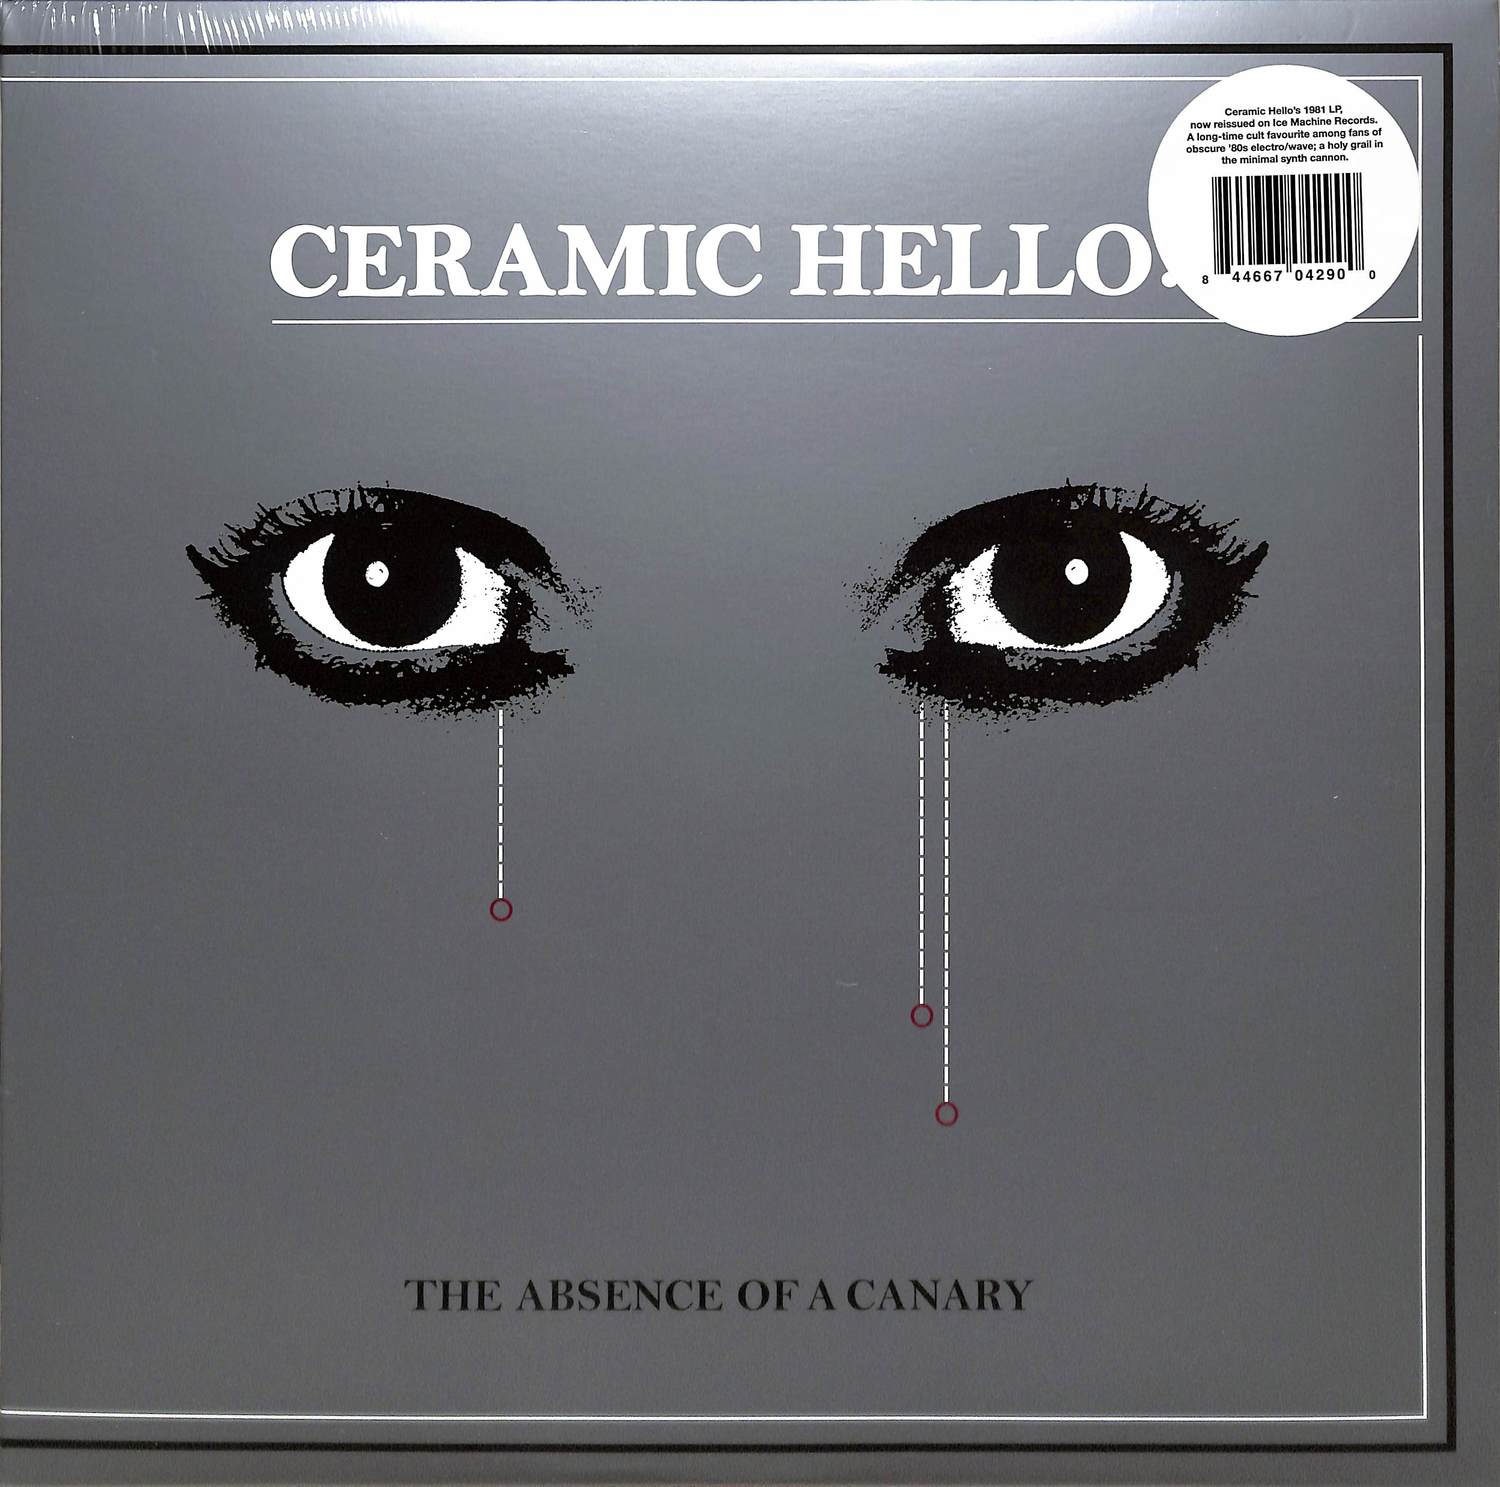 Ceramic Hello - THE ABSENCE OF A CANARY 